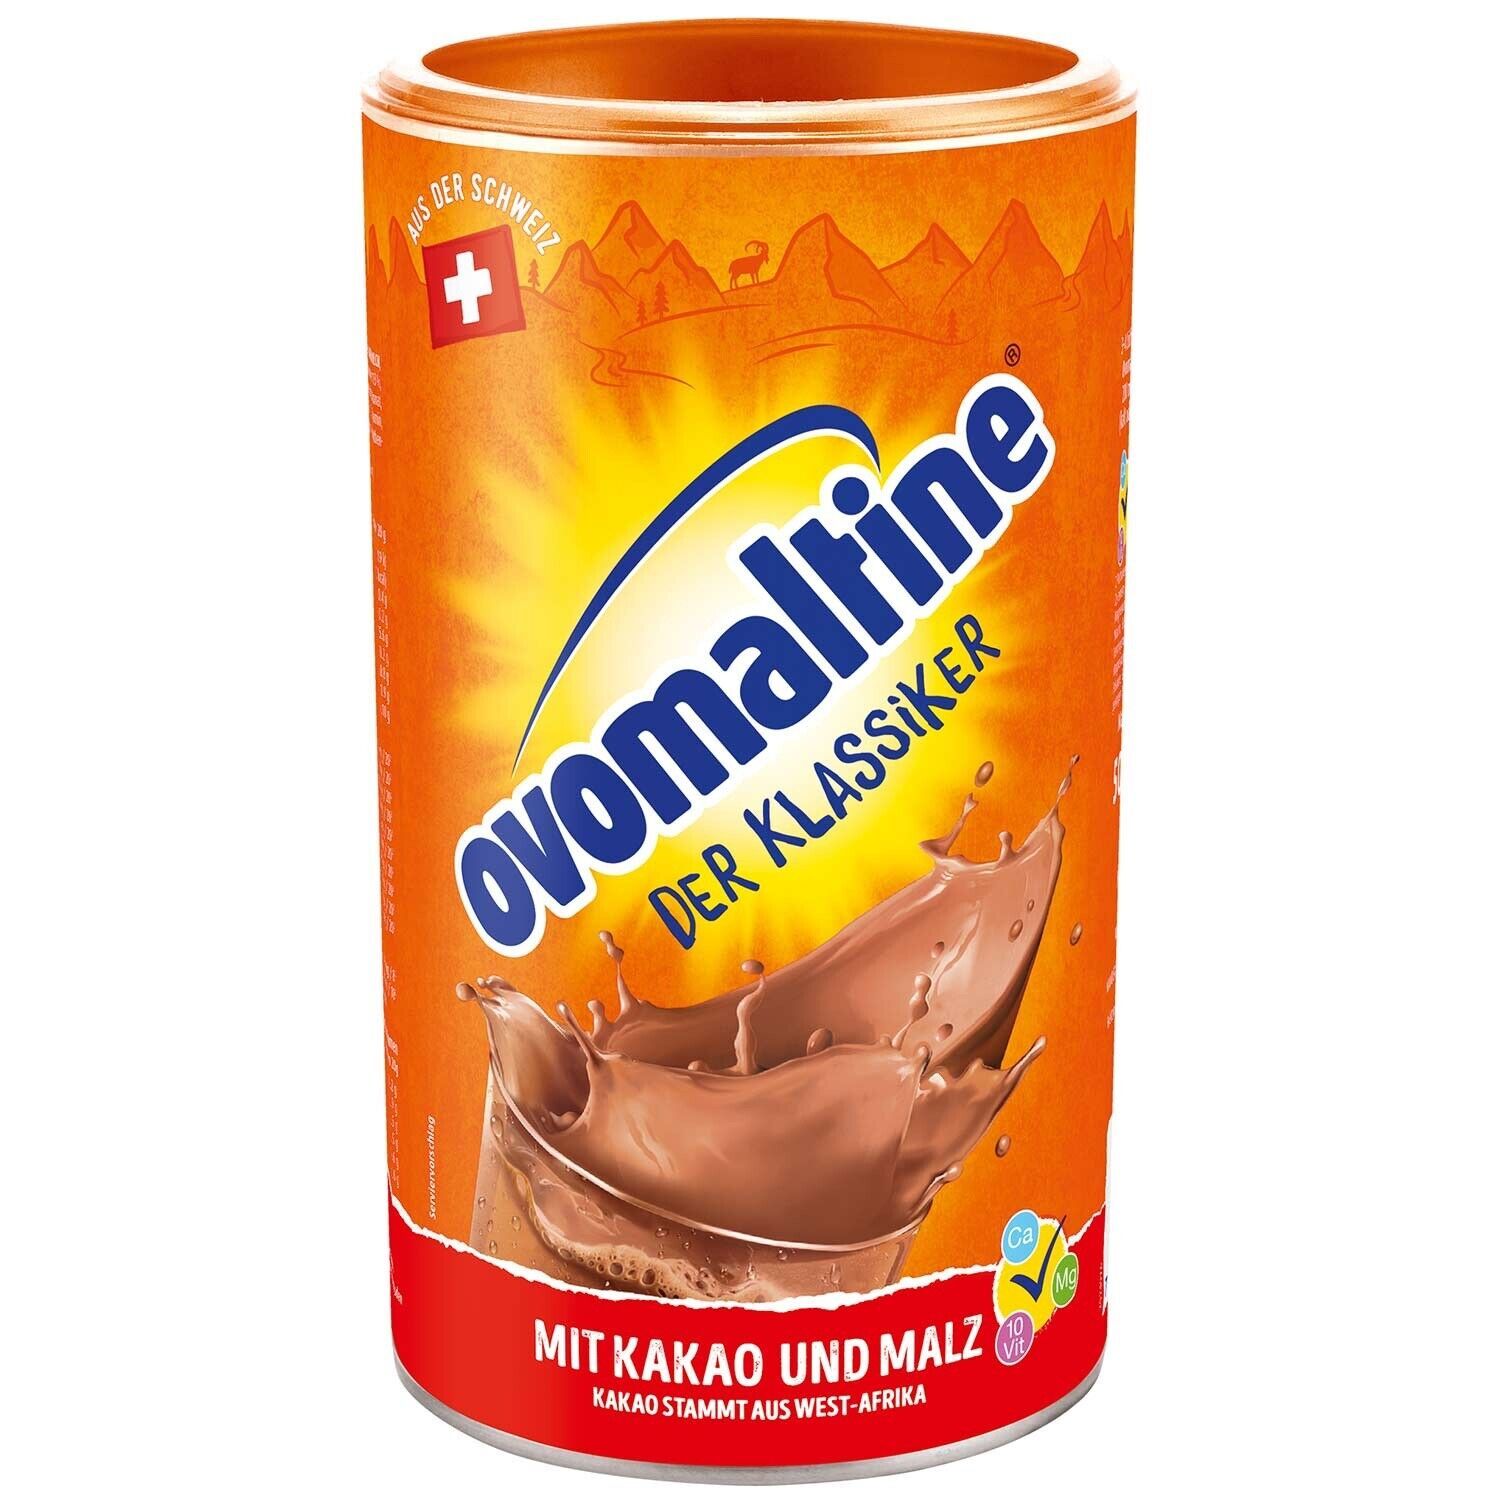 Wander OVOMALTINE Hot Chocolate Mix REFILLABLE CAN XL 500g FREE SHIPPING - $26.72